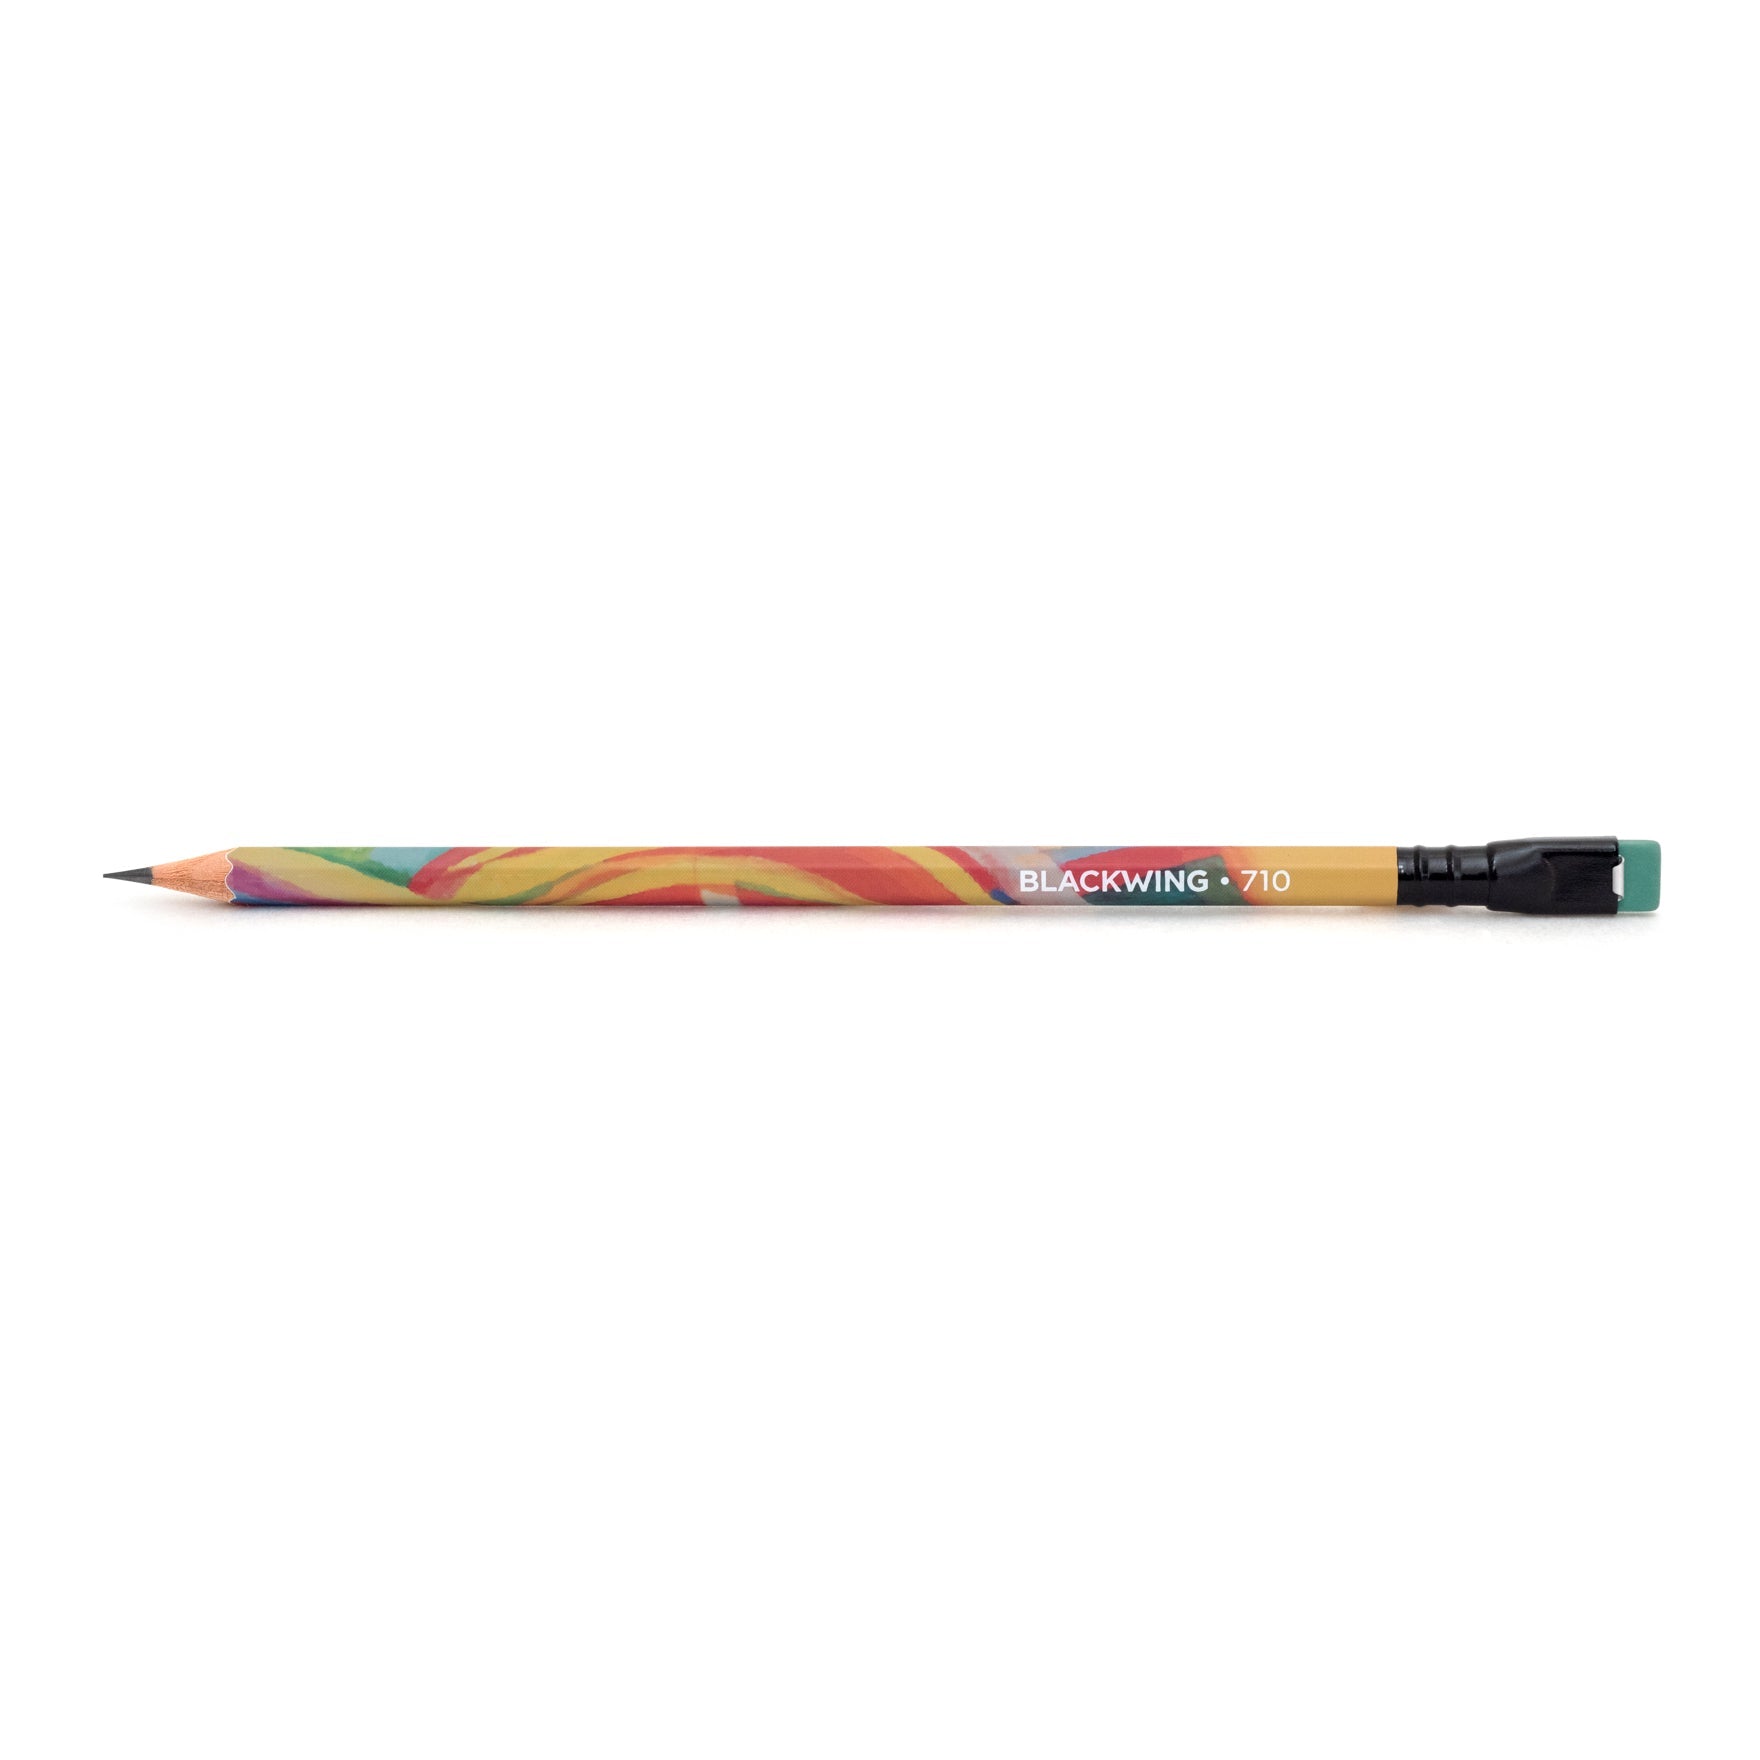 Blackwing volume 710 limited edition